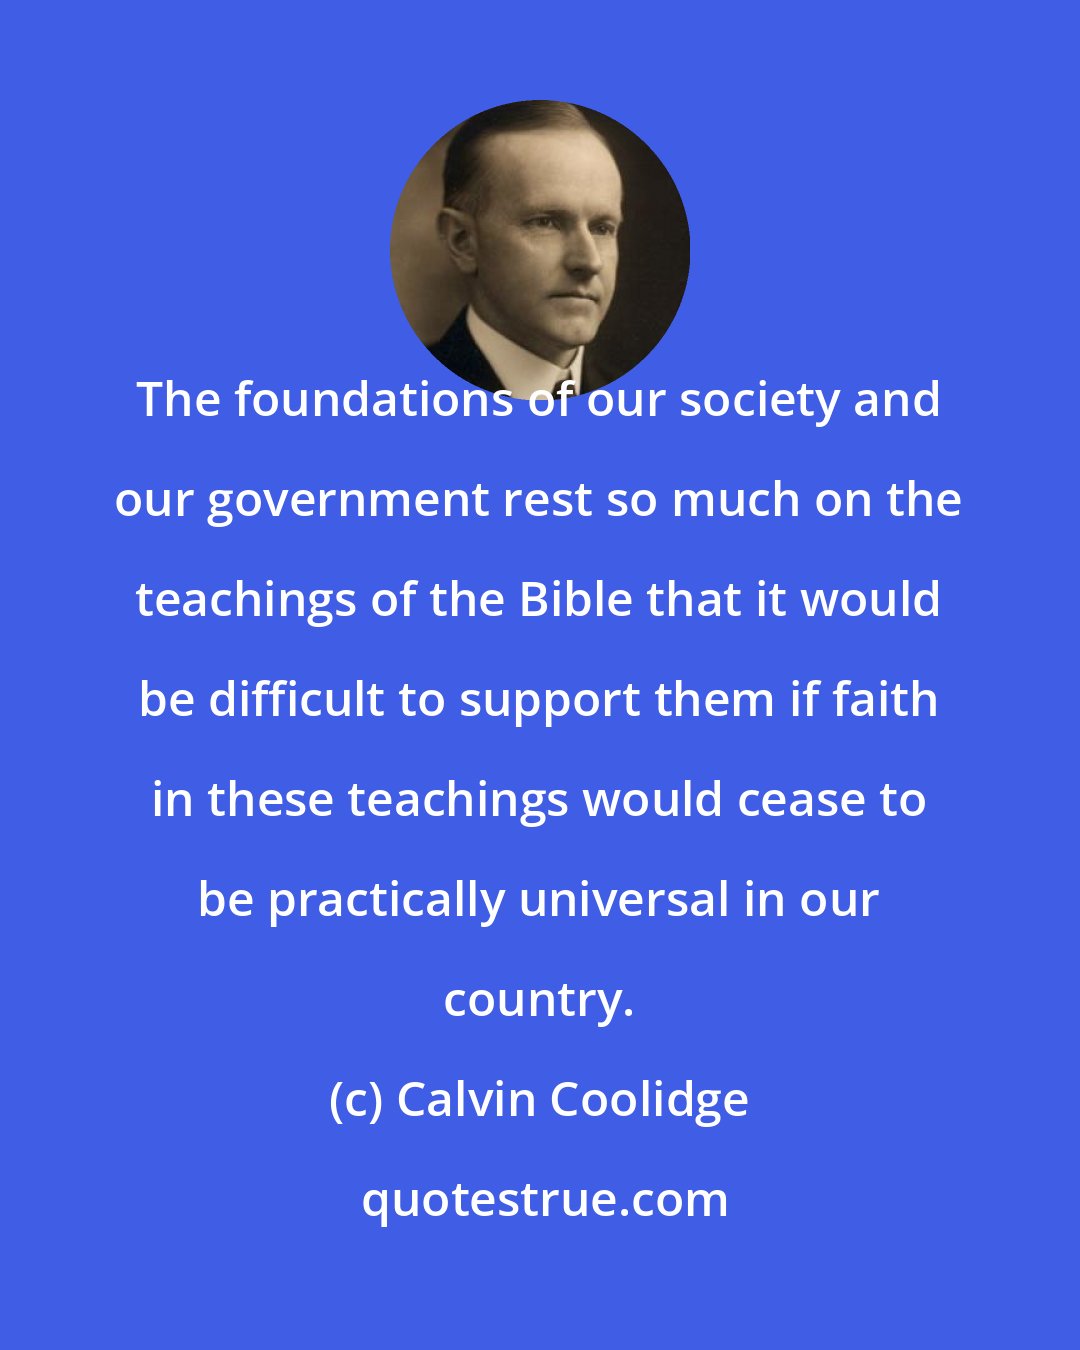 Calvin Coolidge: The foundations of our society and our government rest so much on the teachings of the Bible that it would be difficult to support them if faith in these teachings would cease to be practically universal in our country.